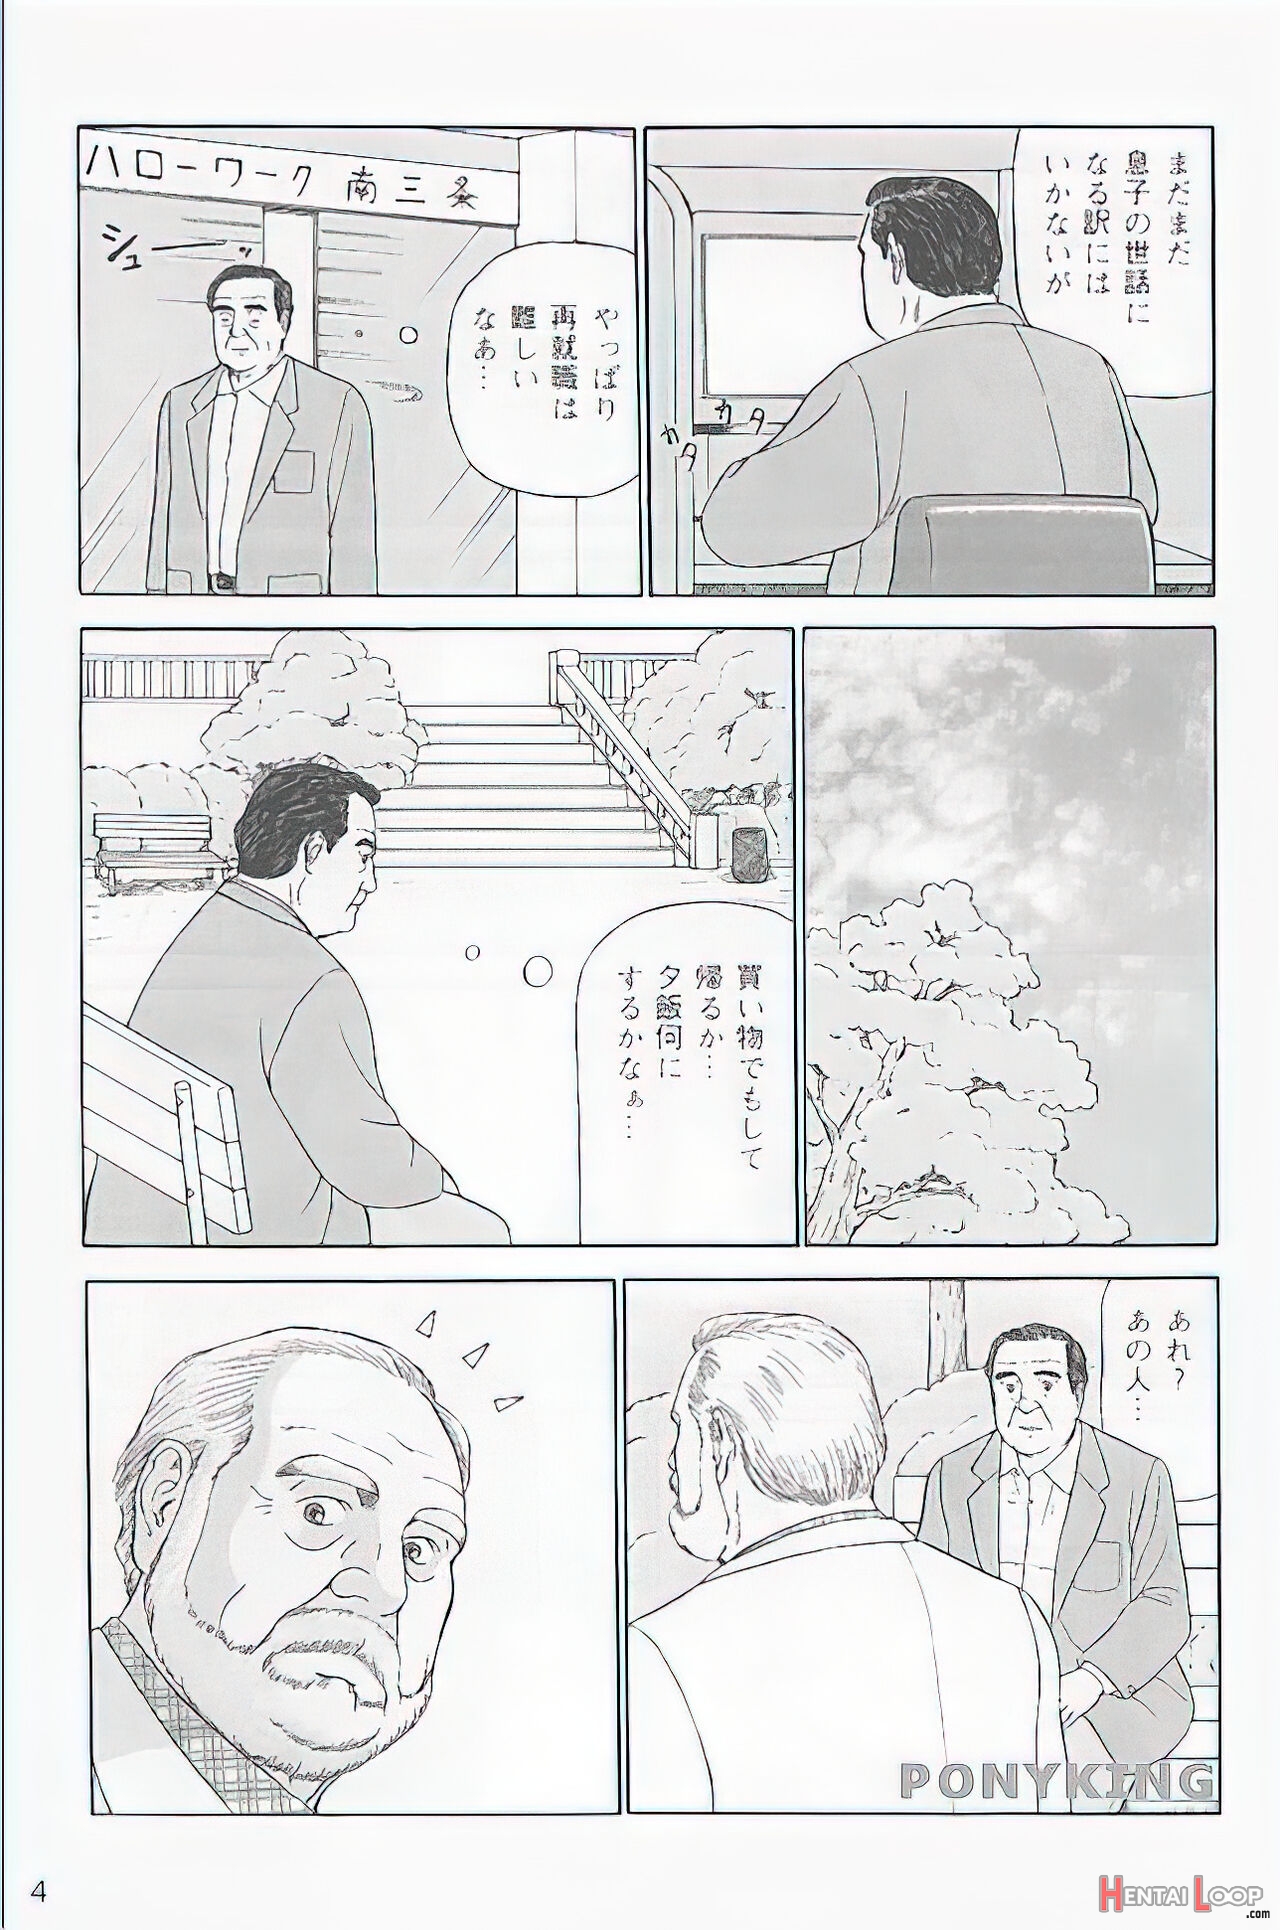 The Middle-aged Men Comics - From Japanese Magazine page 4